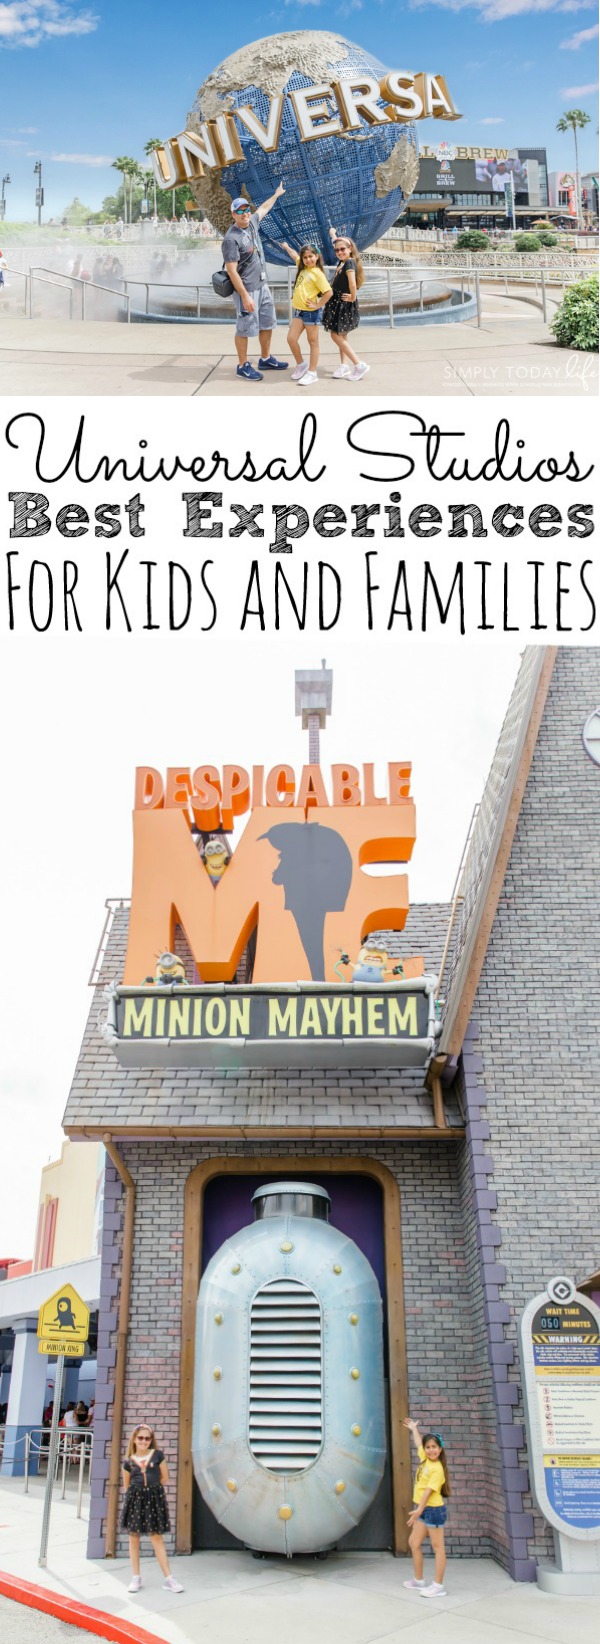 Best Universal Studios Experiences For Kids | A Parents Guide For Family - simplytodaylife.com